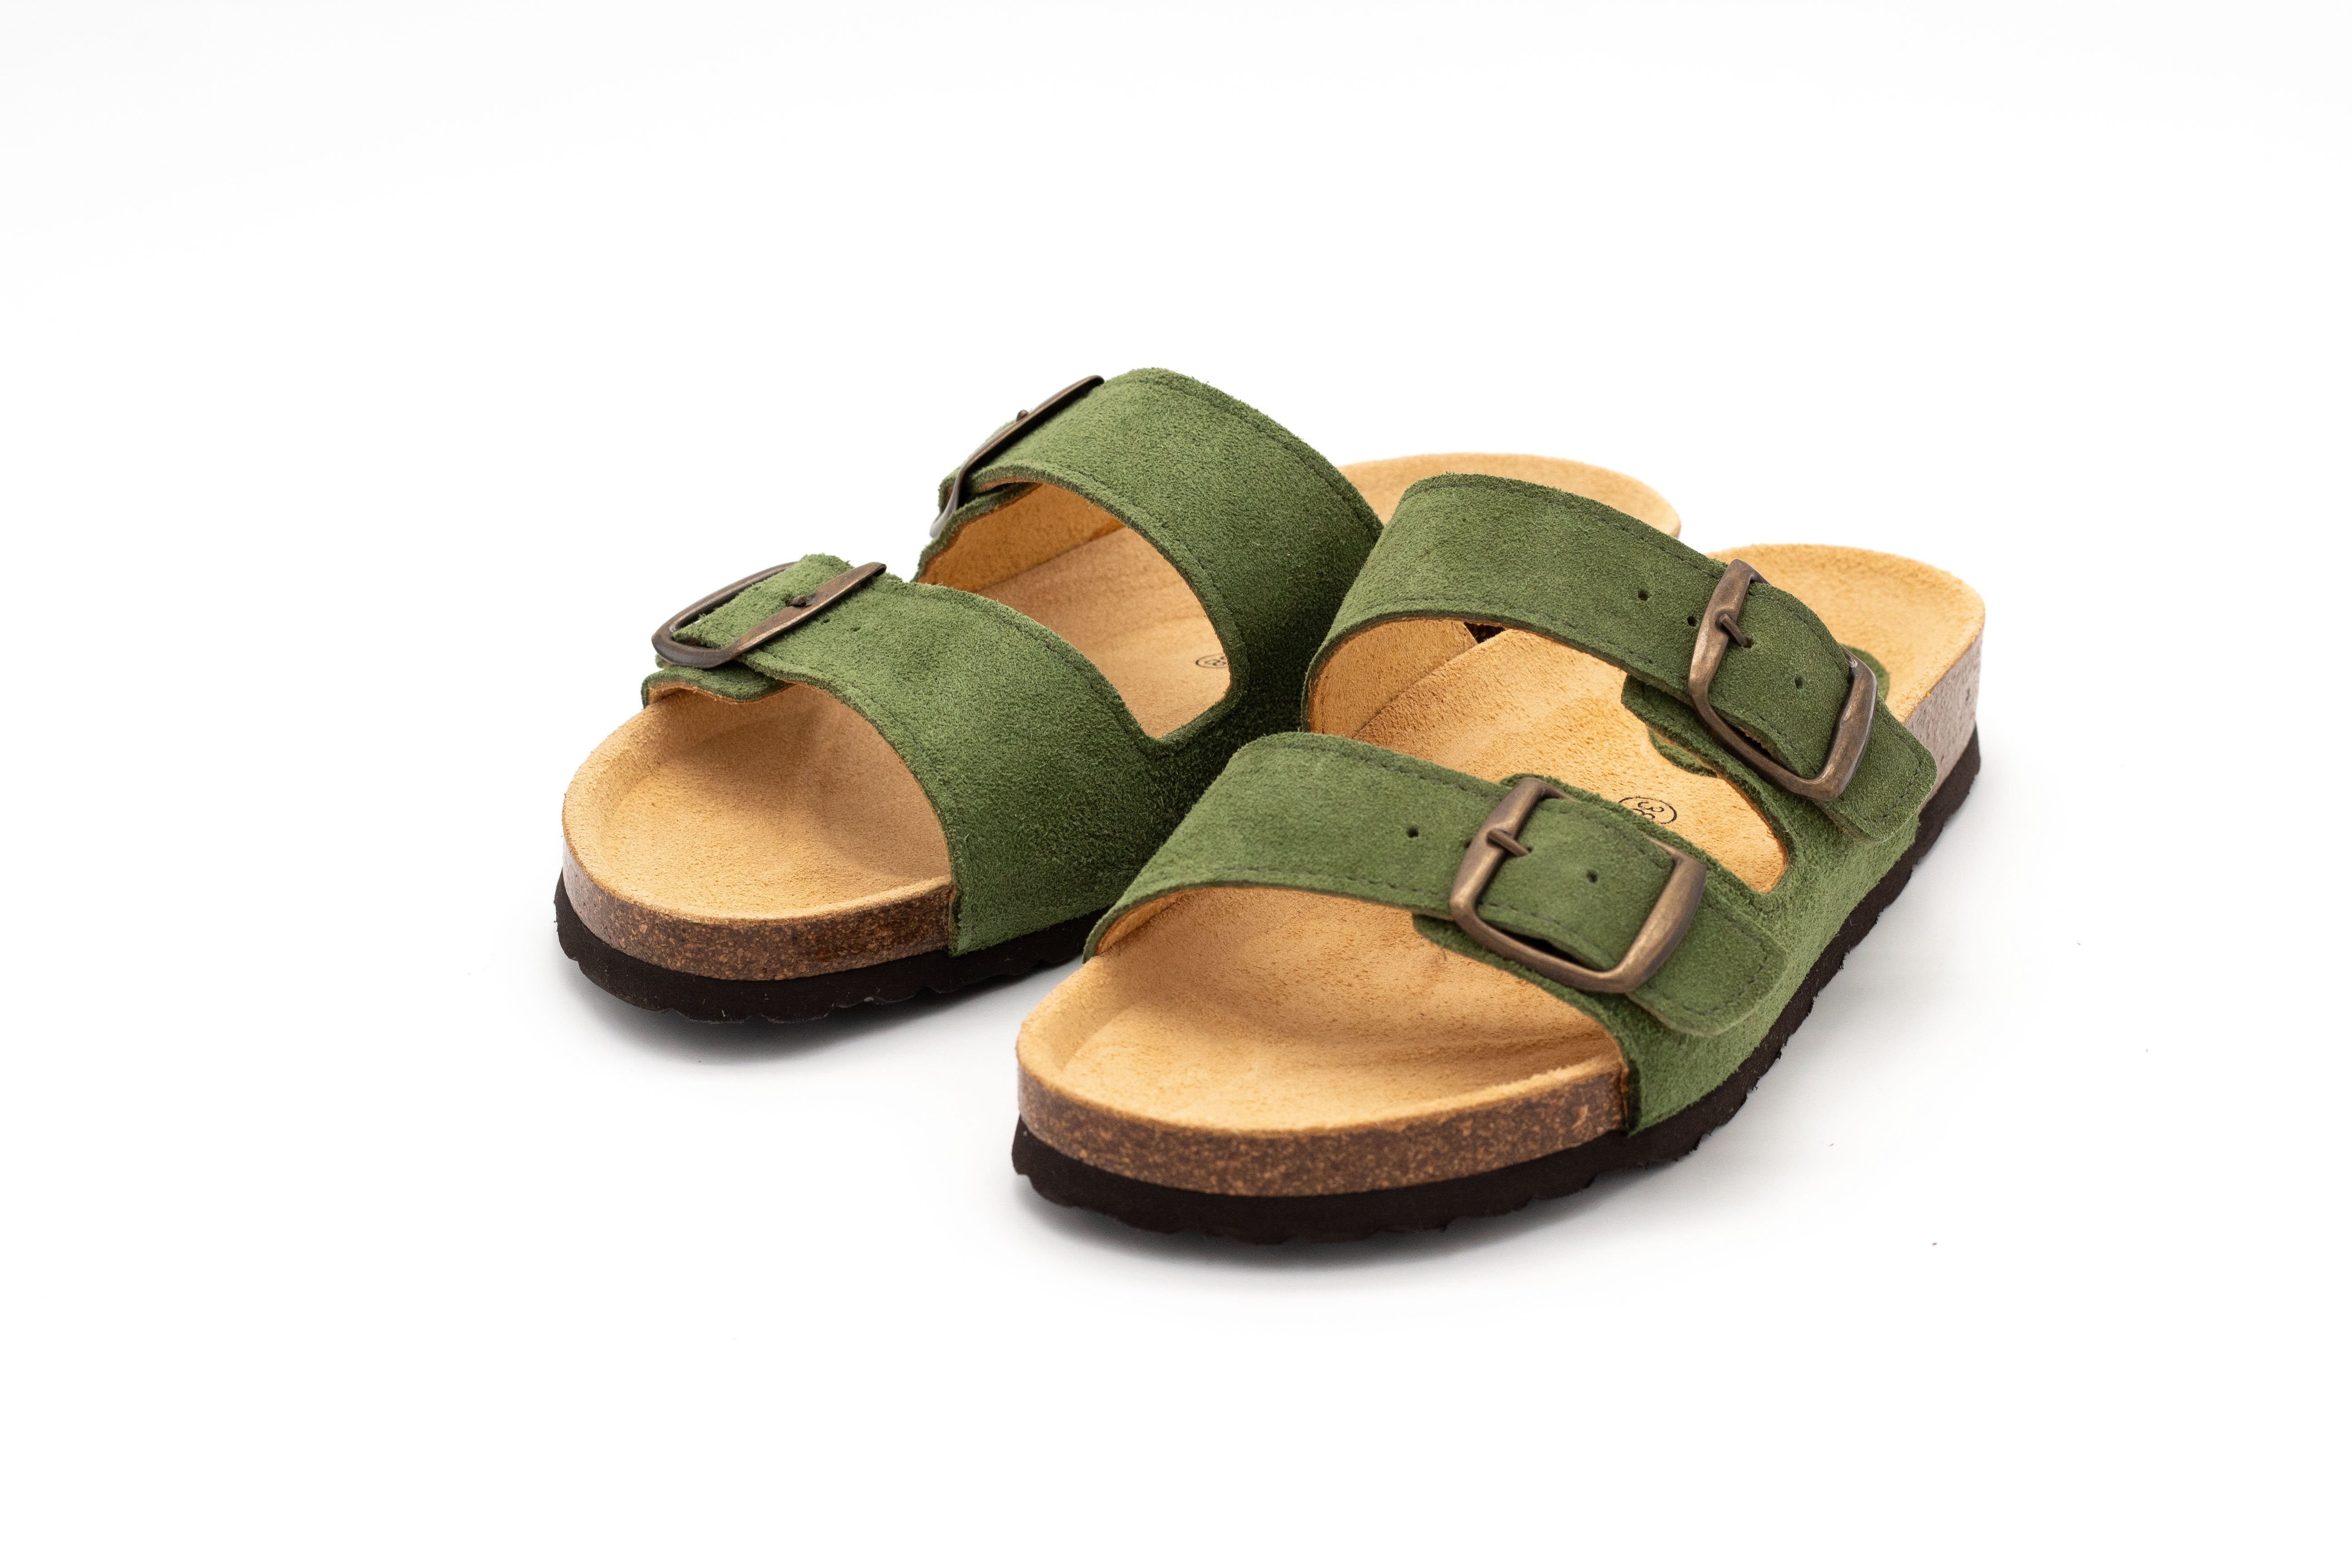 LISBON sandals with double bands in sheep's wool